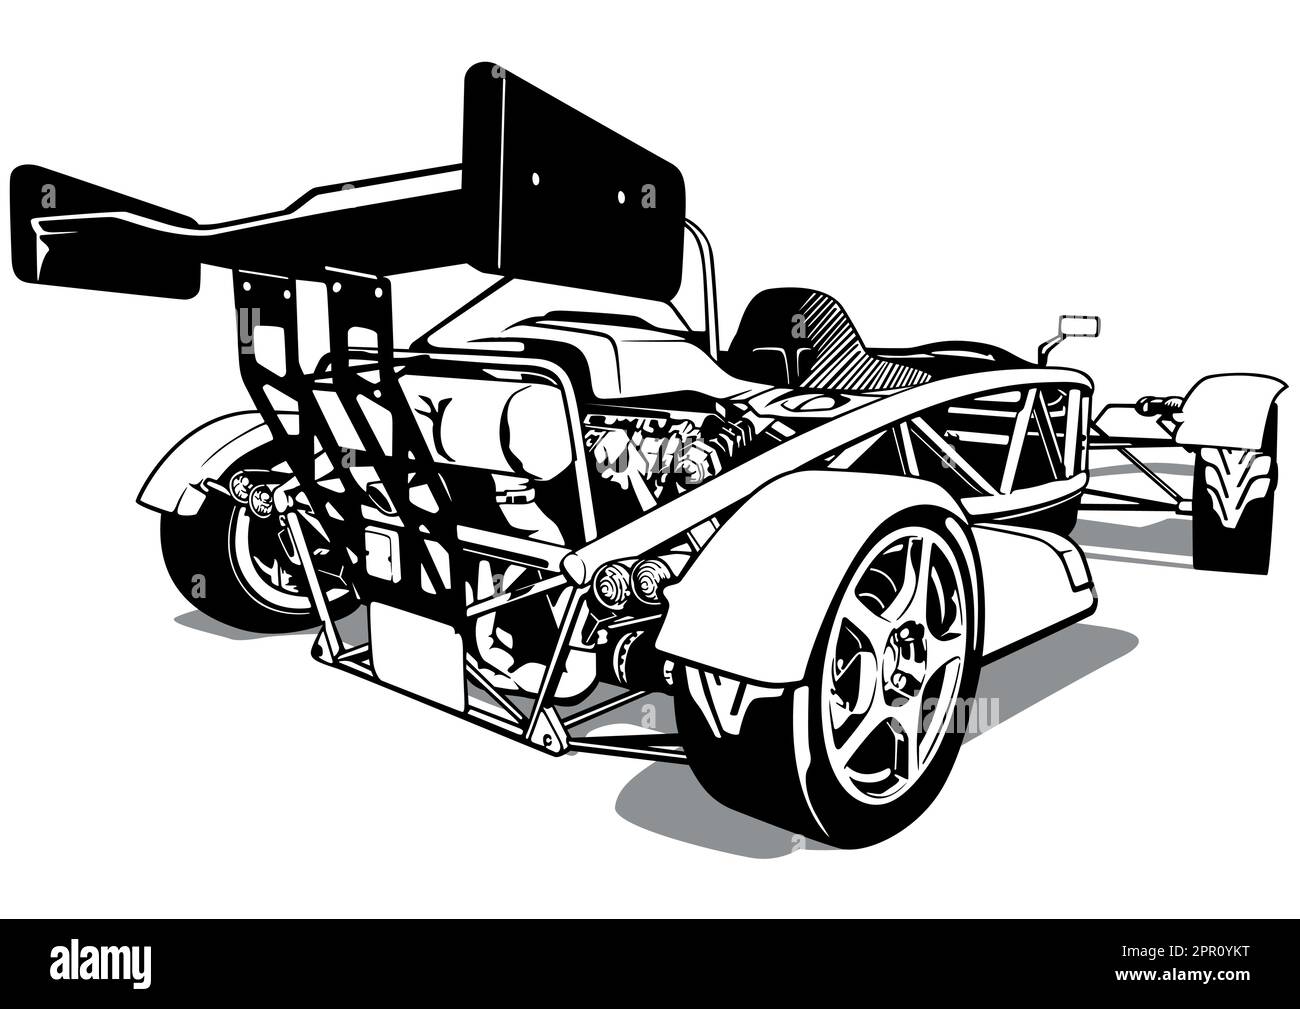 Drawing of a luxury sports car from front view Vector Image